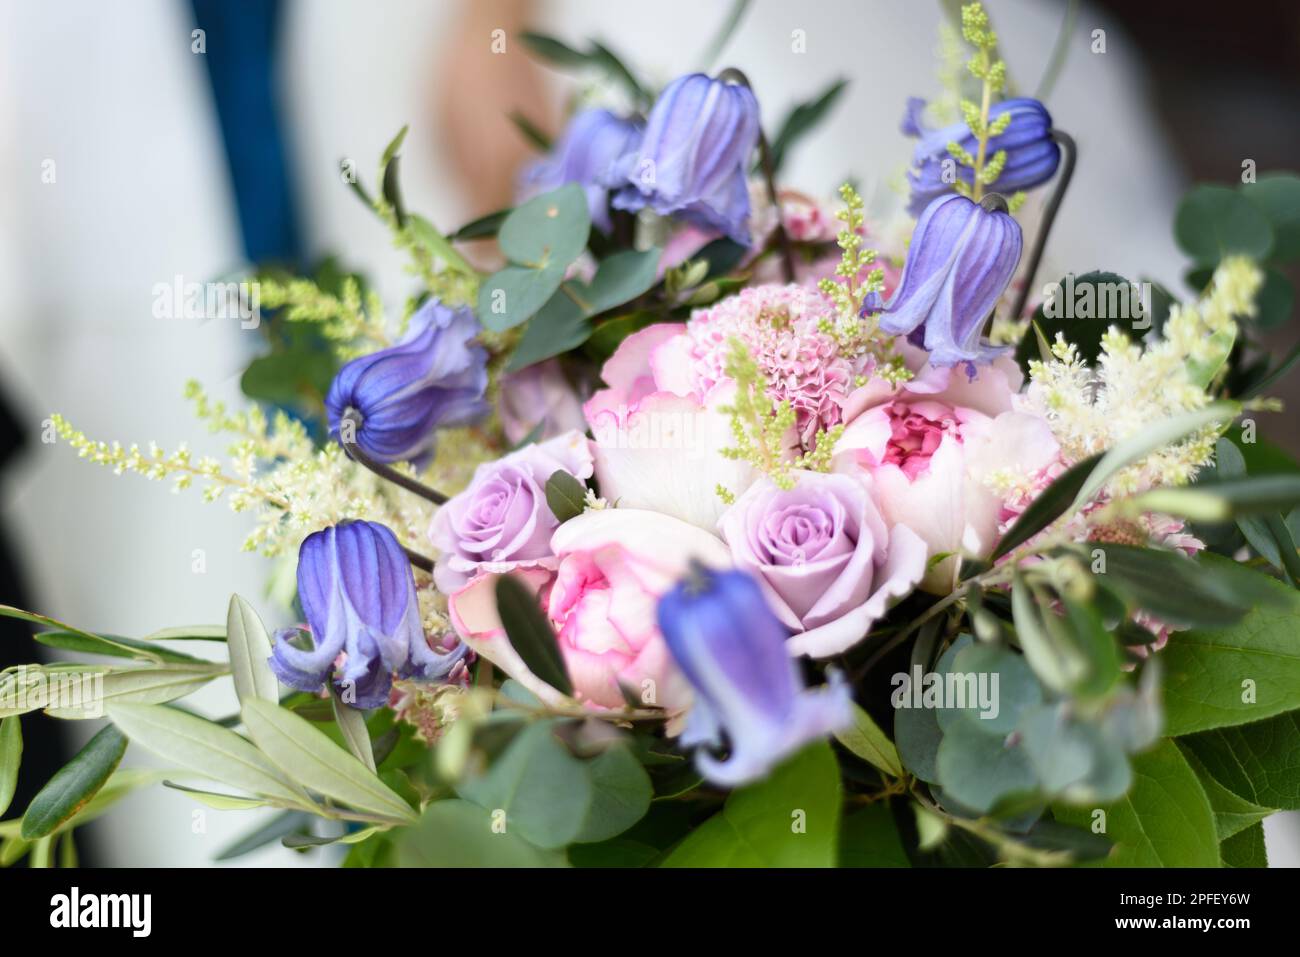 Wedding bouquet with blue and purple flowers and pink roses. Stock Photo